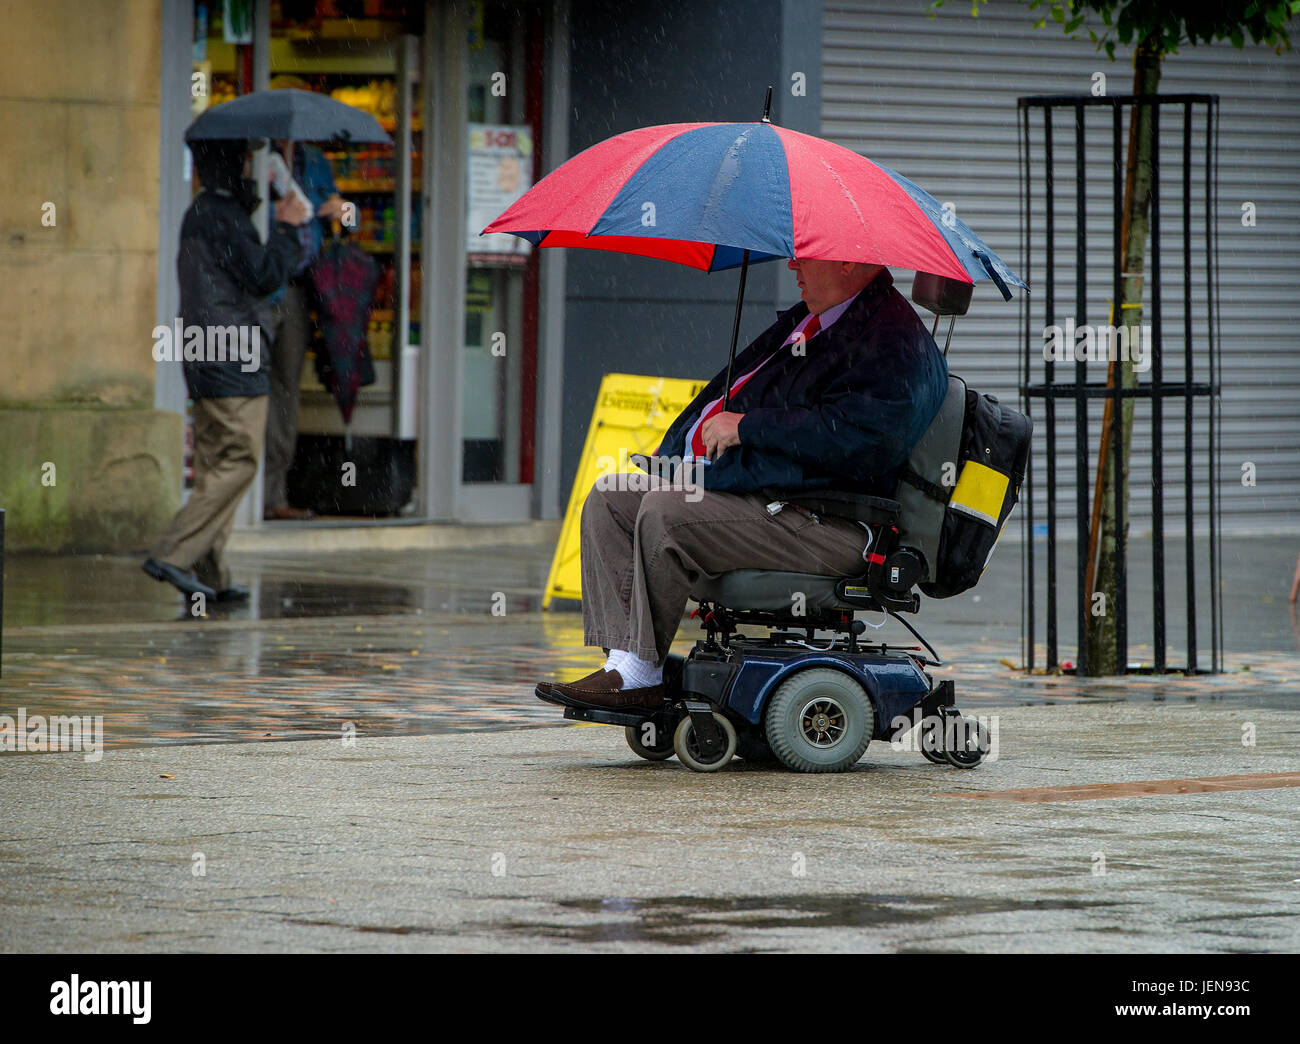 Bolton, Lancashire, UK. 27th June, 2017. It was definitely an umbrella day as a filthy wet morning greeted shoppers and people going to work through Victoria Square in Bolton, Lancashire, UK. The north west of England has been issued with a yellow warning for torrential rain for the next 24 hours. Picture by Paul Heyes, Tuesday June 27, 2017. Credit: Paul Heyes/Alamy Live News Stock Photo